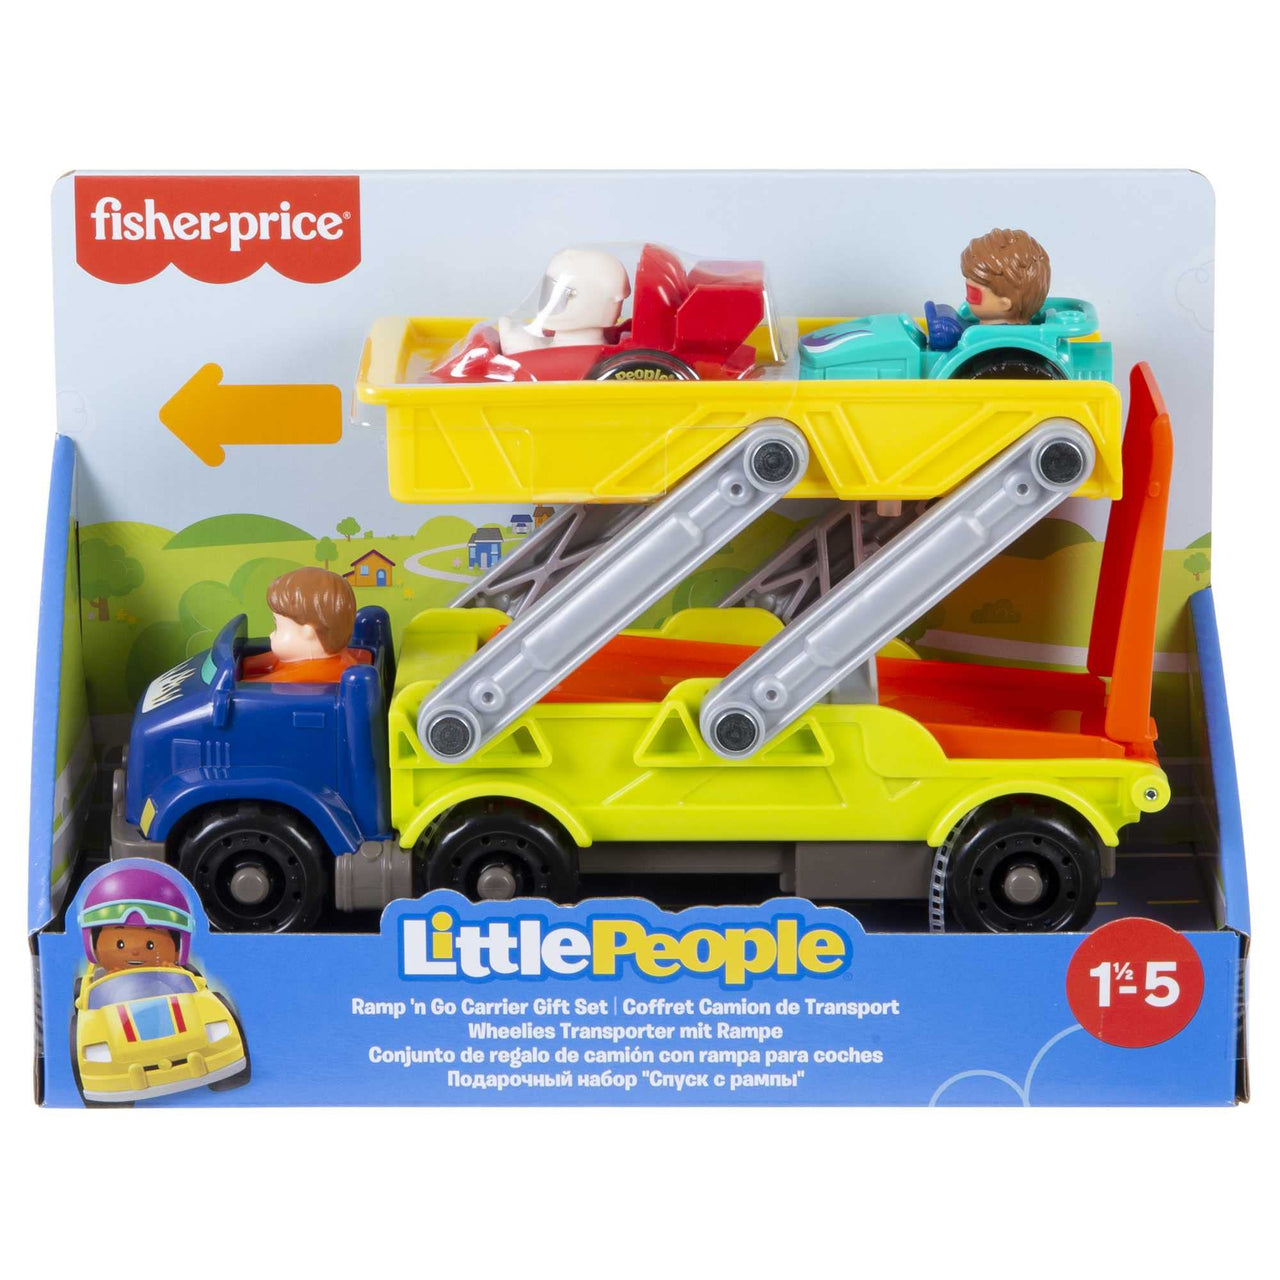 Fisher-Price Little People Ramp 'n Go Carrier Gift Set